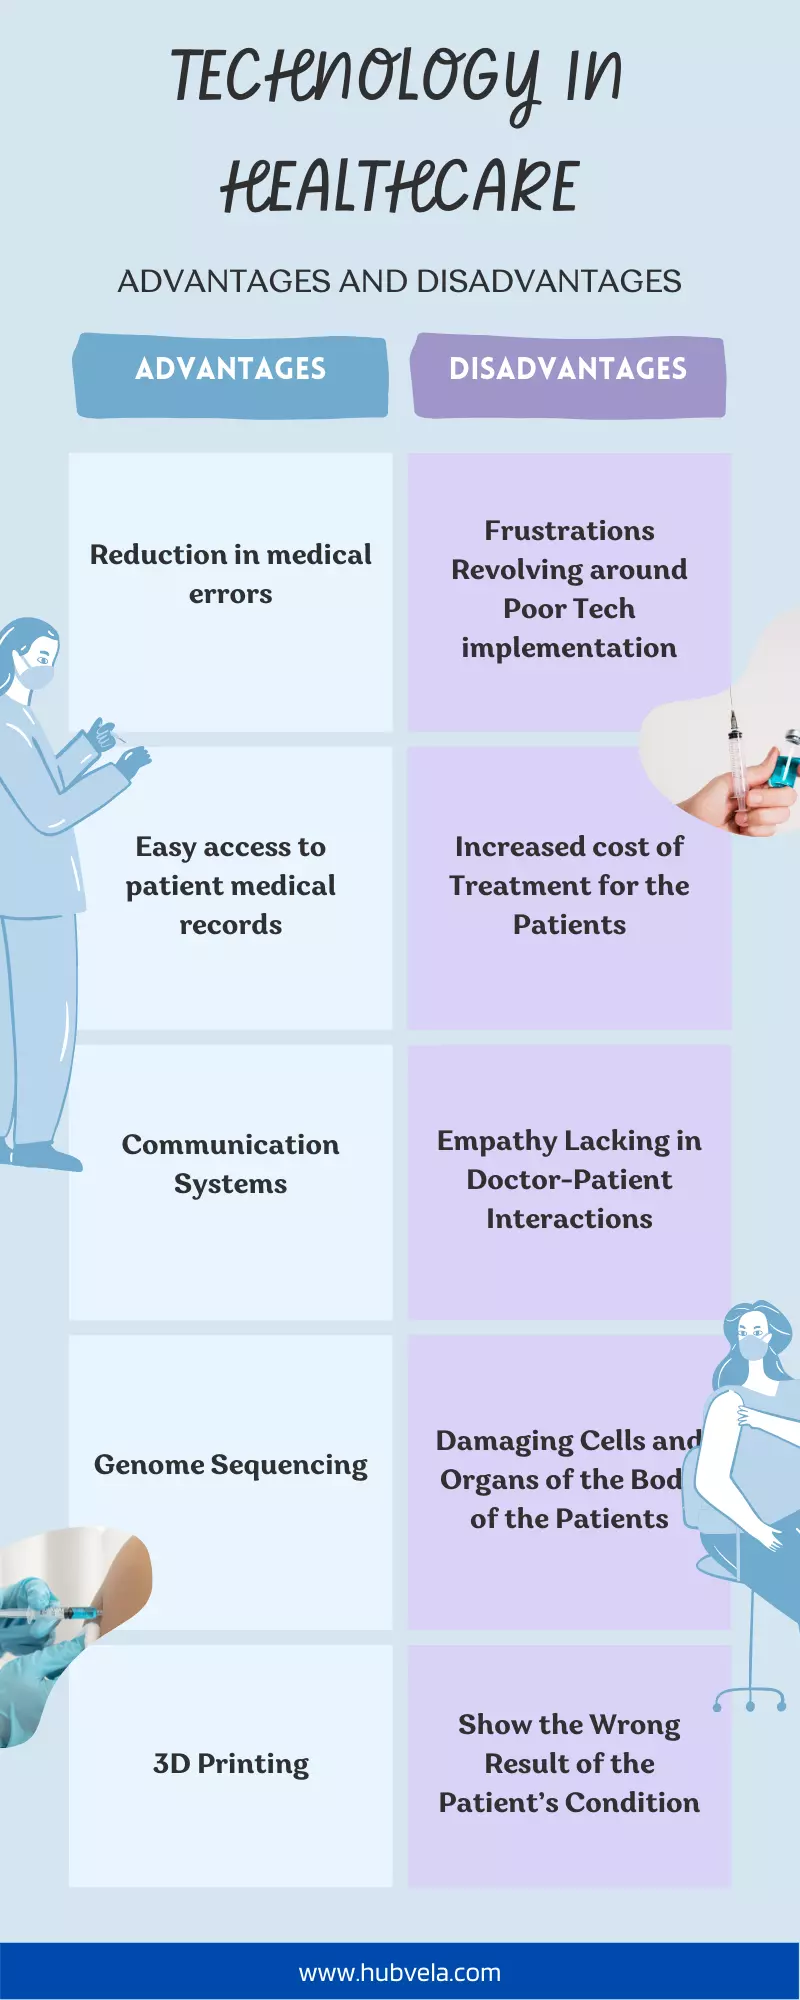 Technology advantages and disadvantages in healthcare infographic